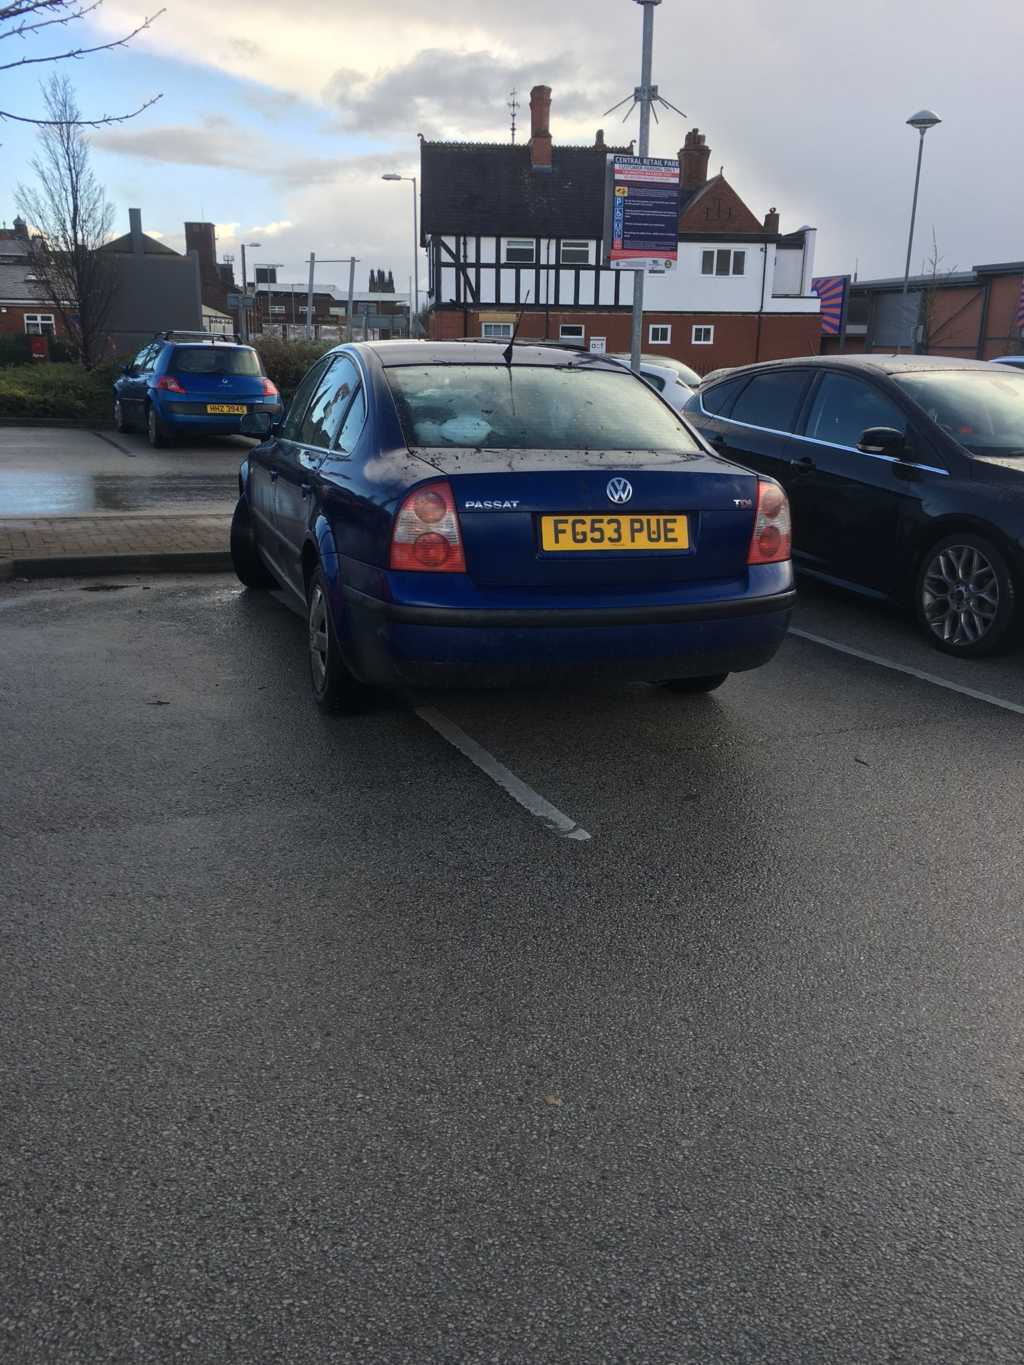 FG53 PUE is an Inconsiderate Parker